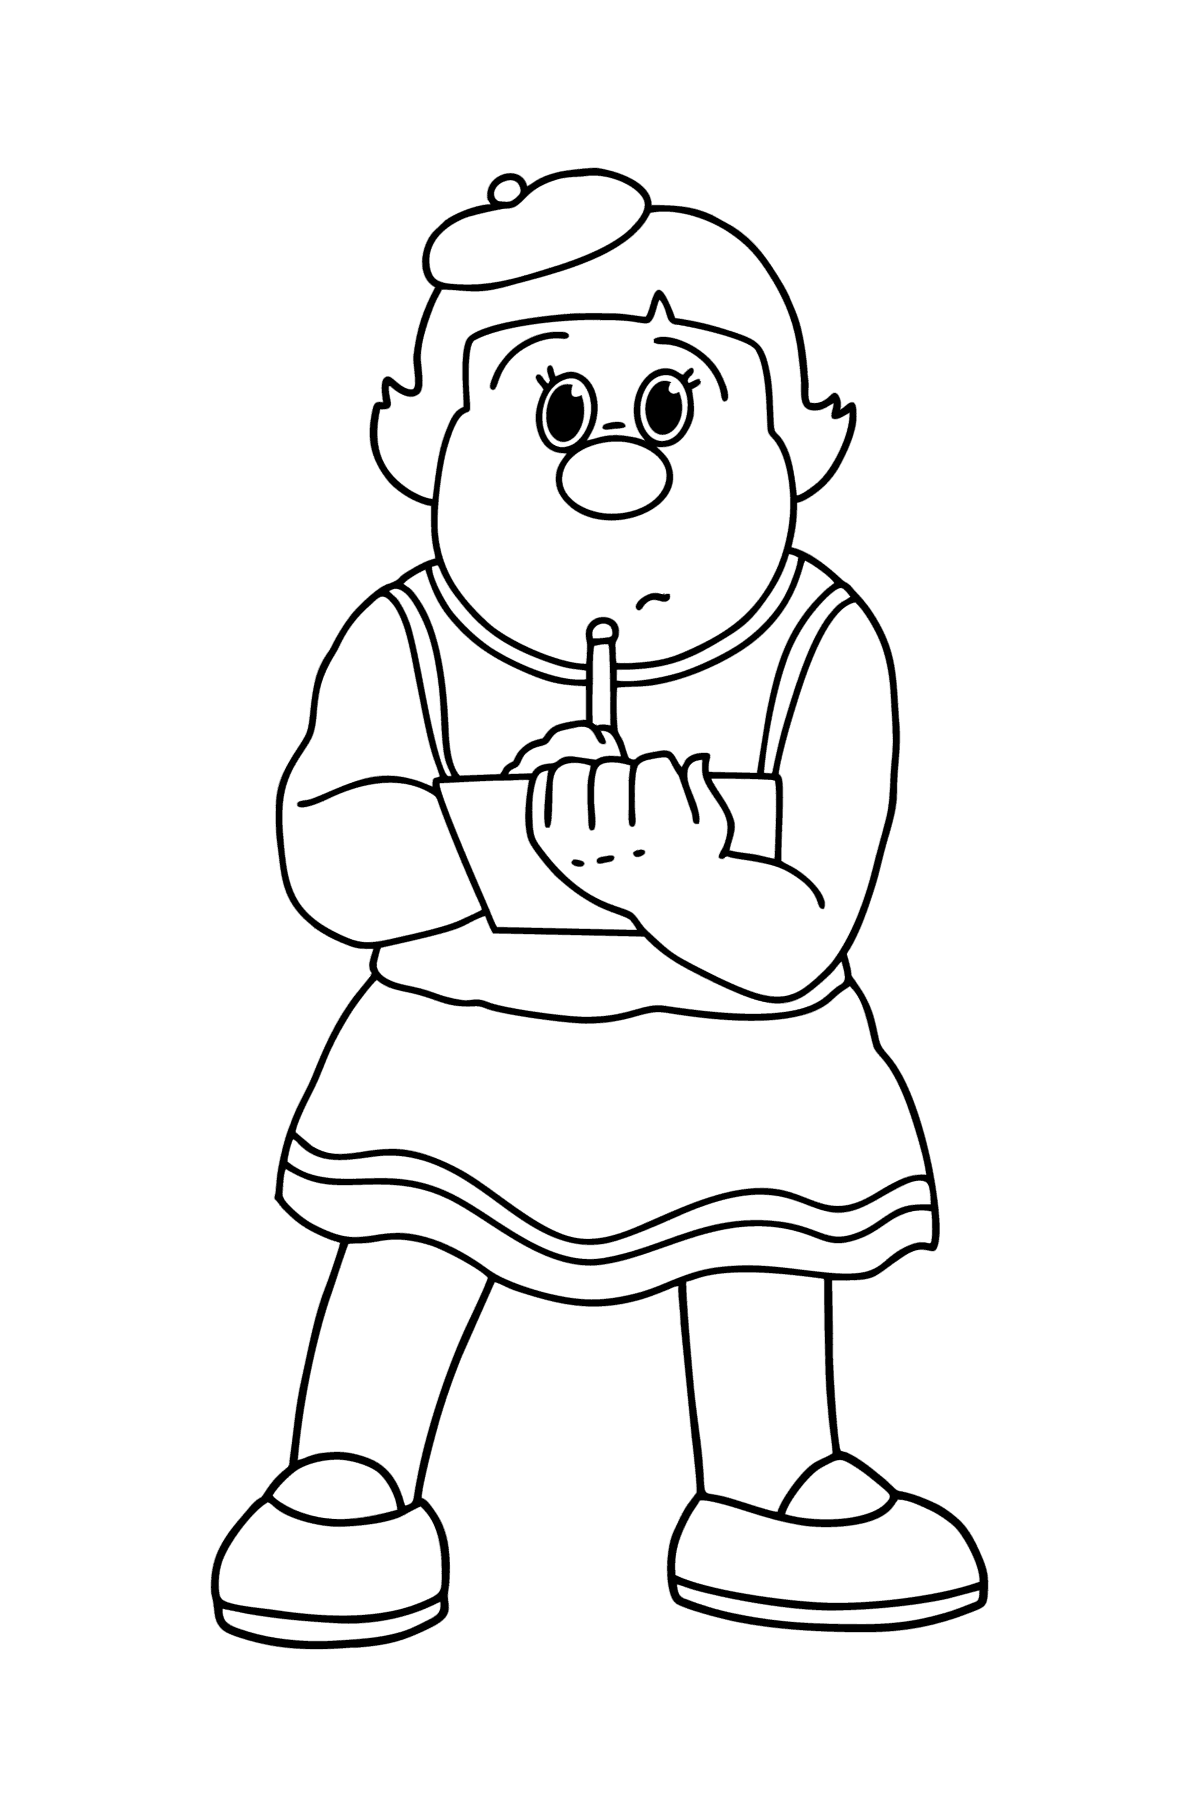 Doraemon Jaiko Gouda Little G сoloring page - Coloring Pages for Kids